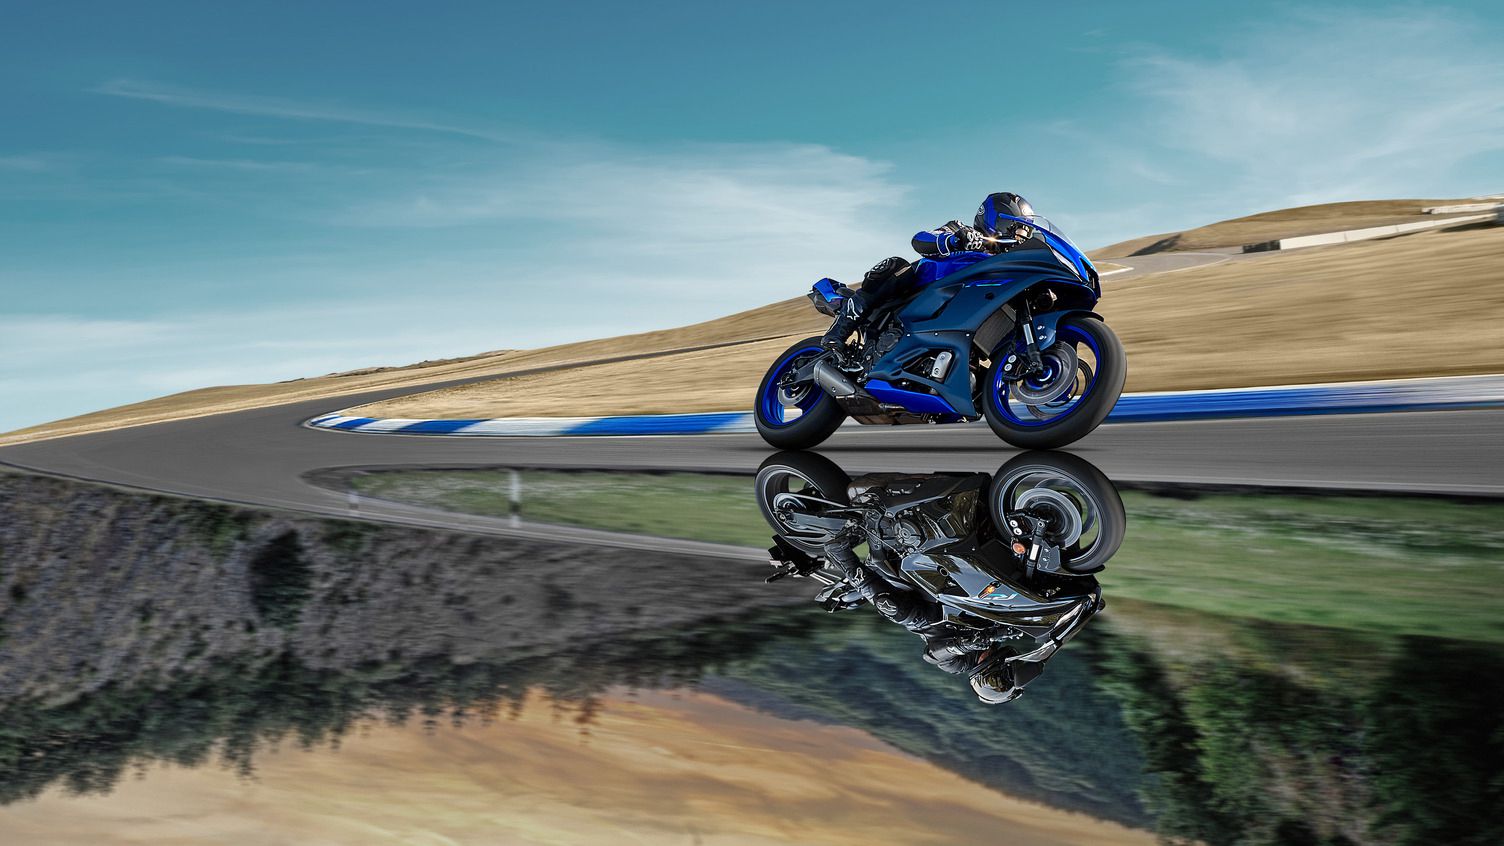 The 2022 YZF-R7 is available in blue or black. Yamaha photo